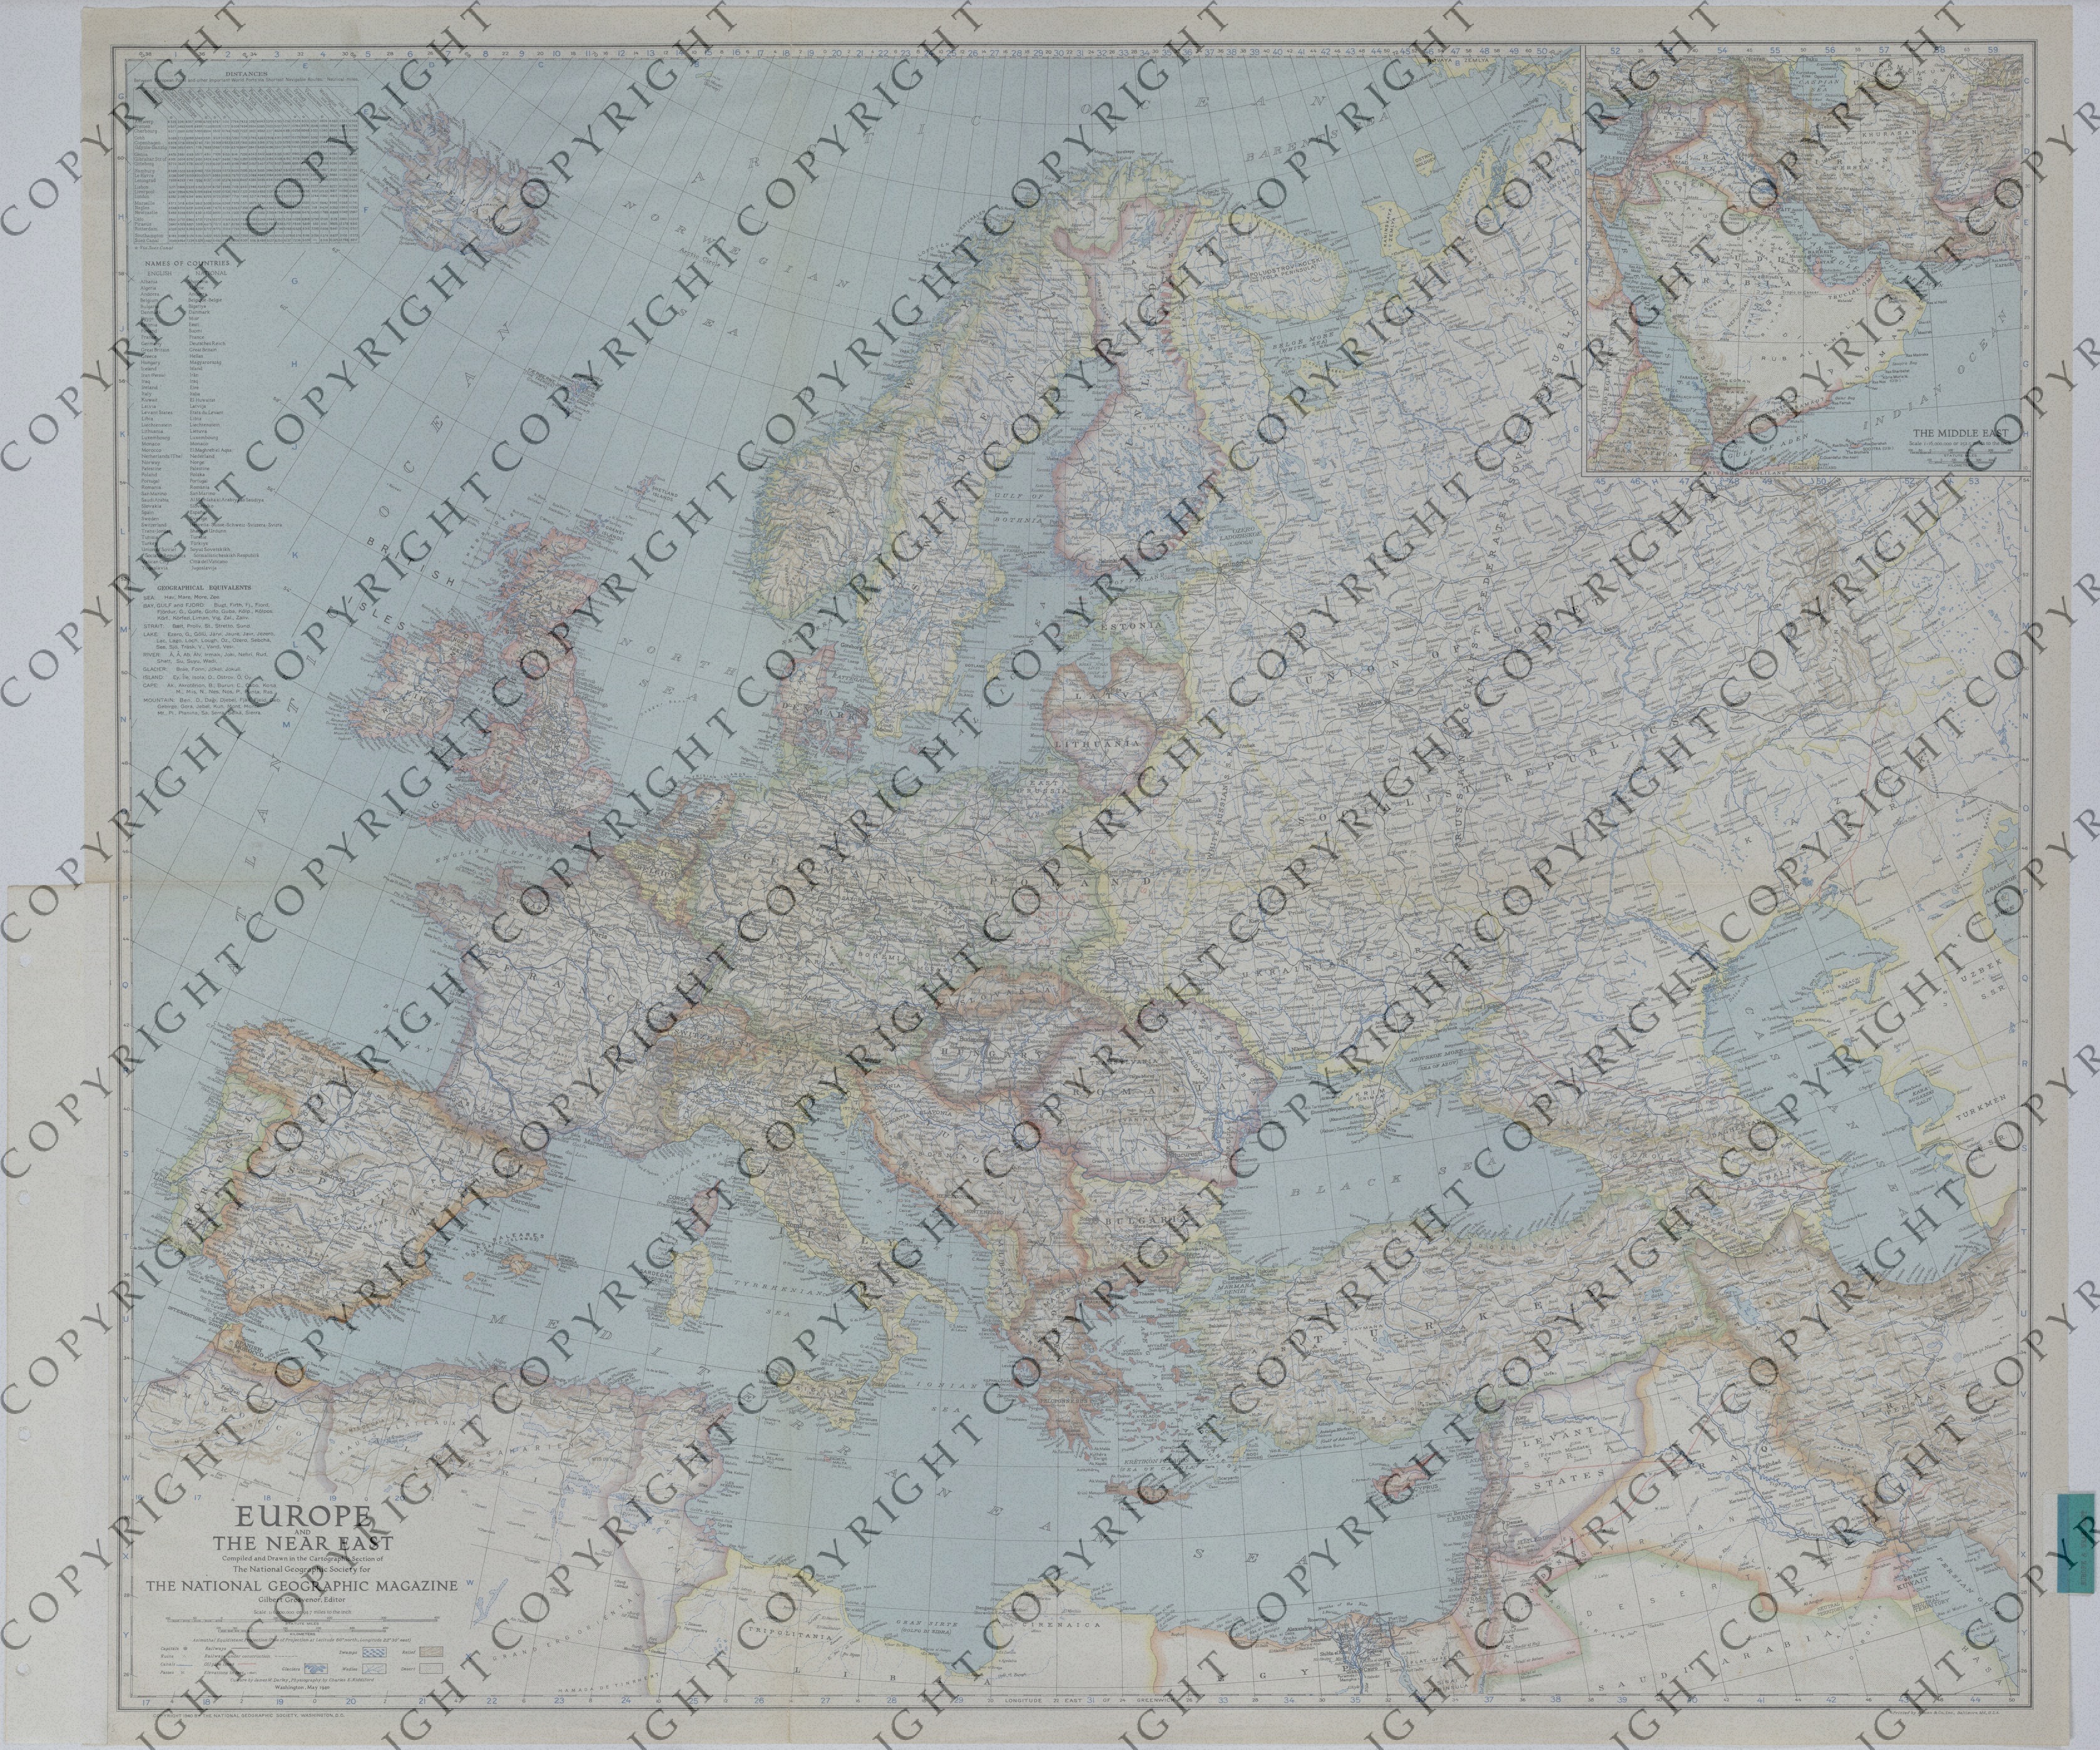 Map of Europe and the Near East